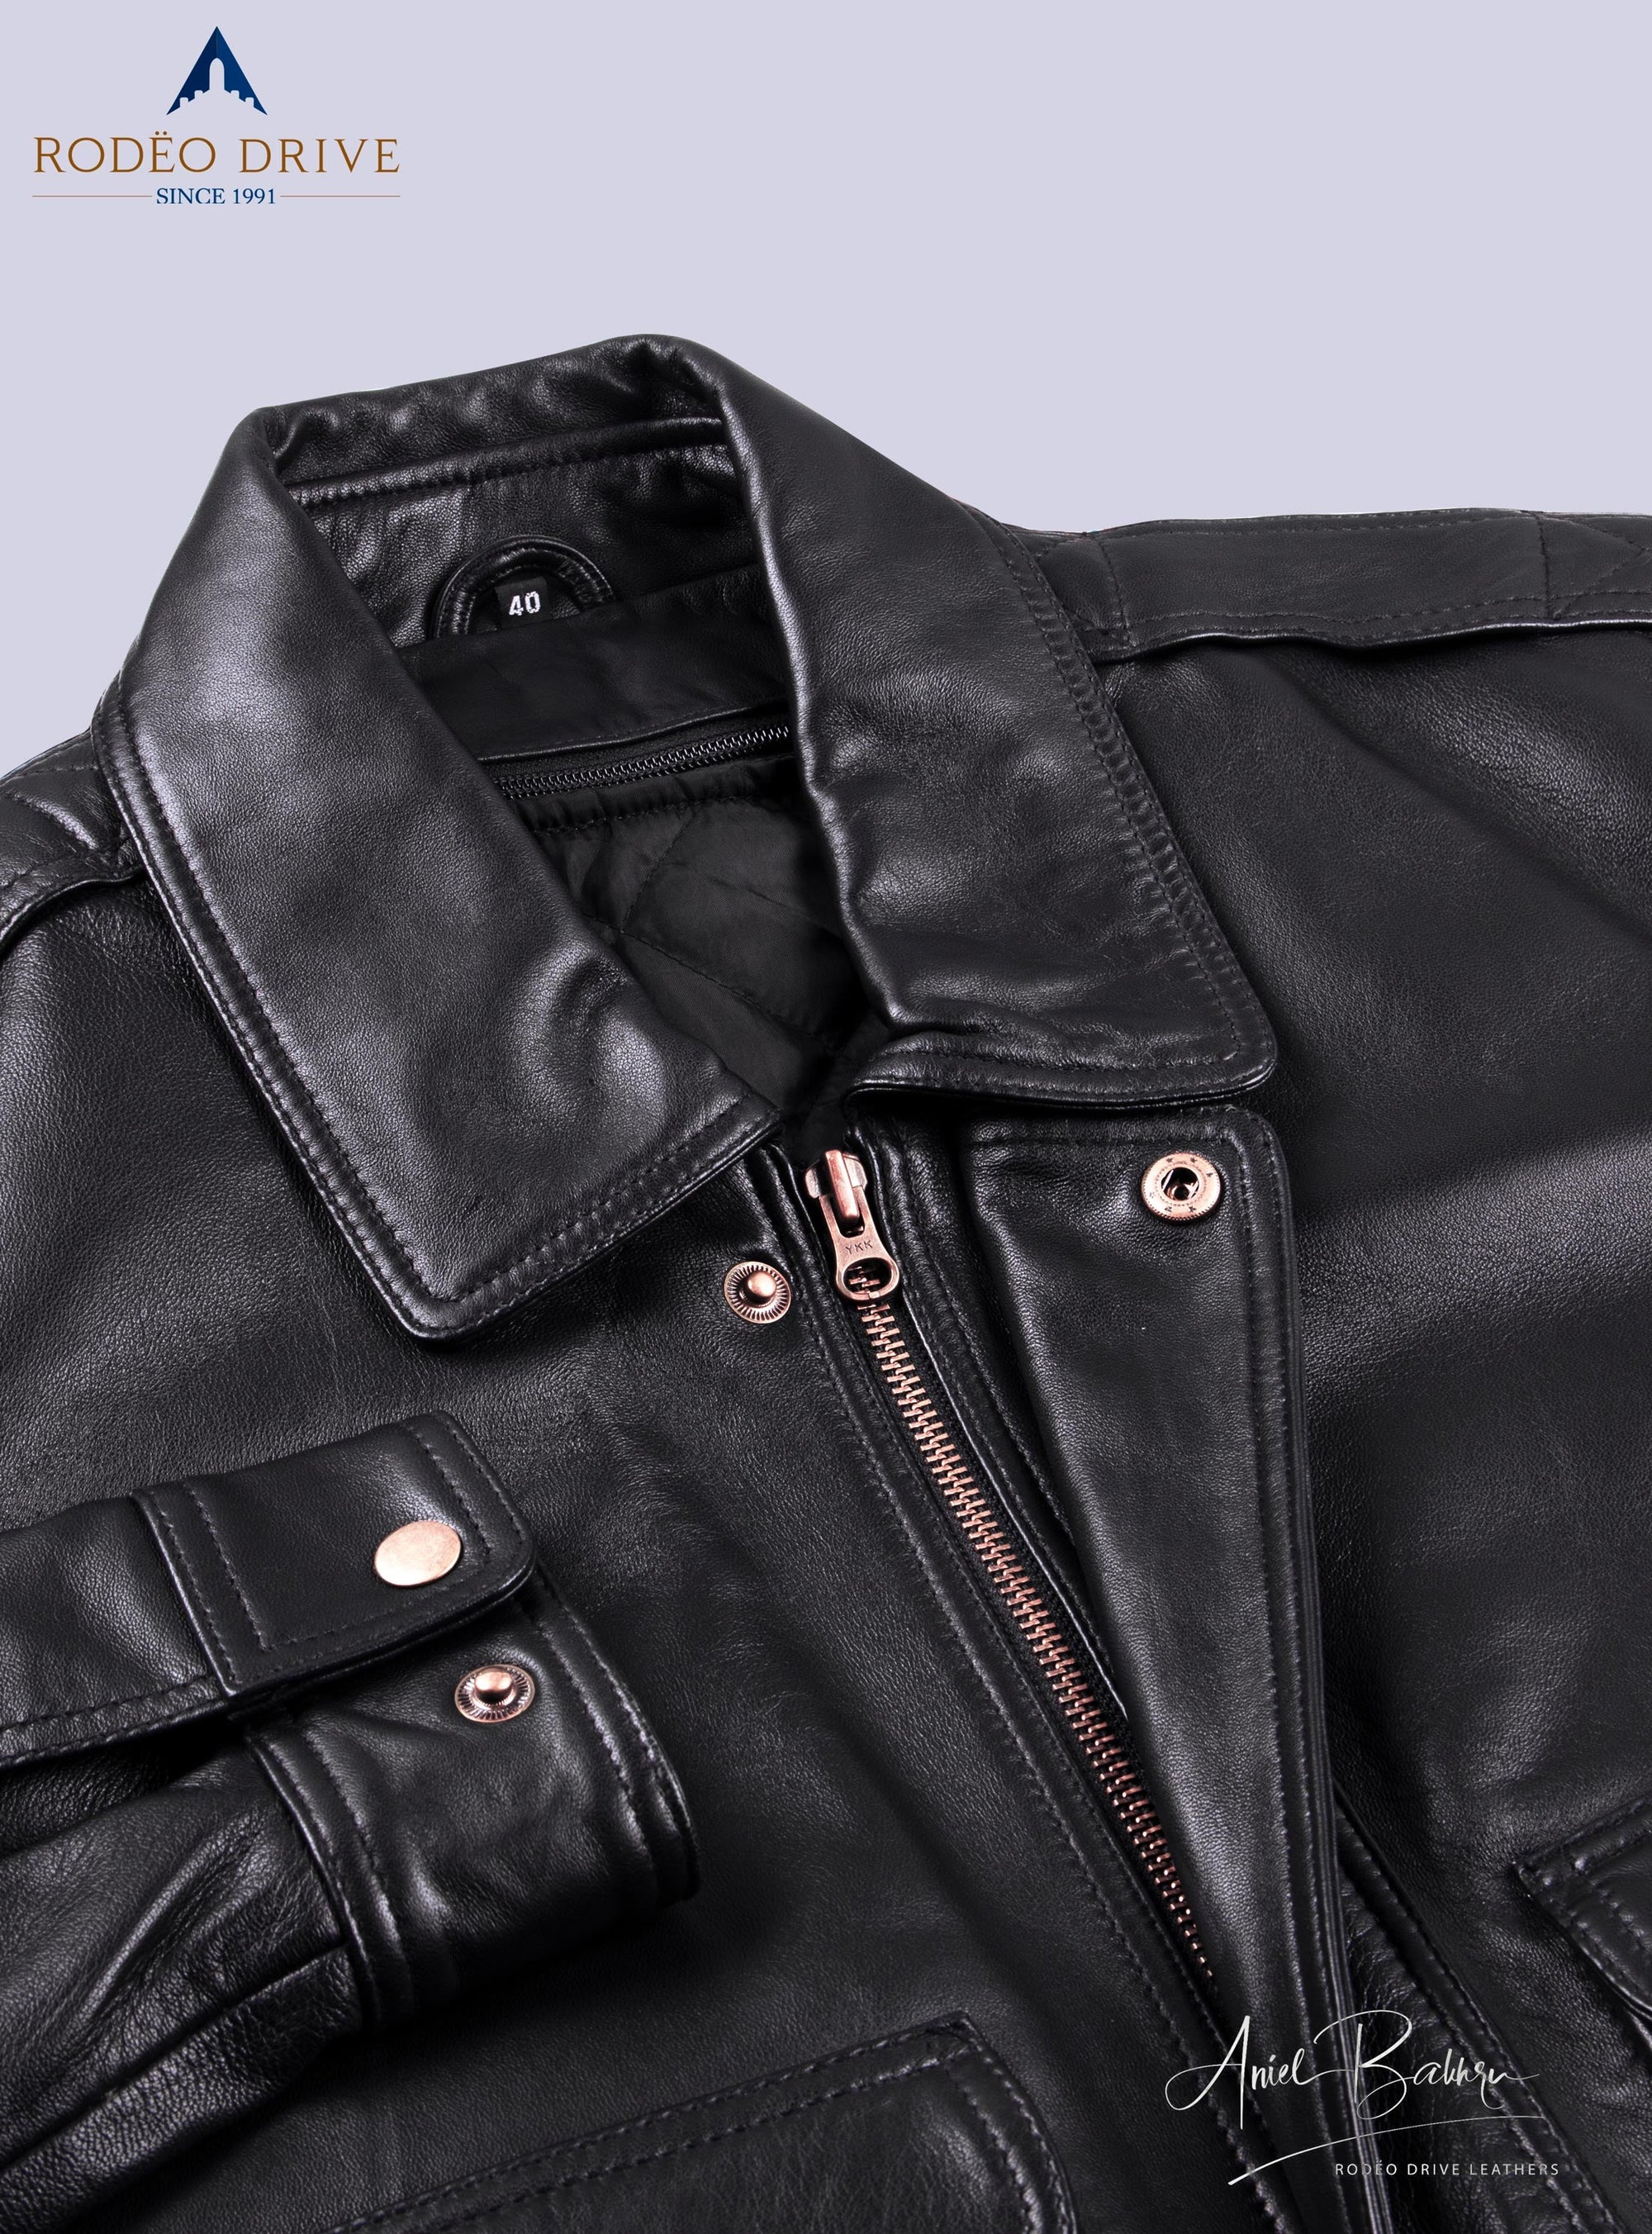 Upper closer look of collar and zip of inside look of AIR WISCONSIN UNIFORM LEATHER JACKETS WOMEN